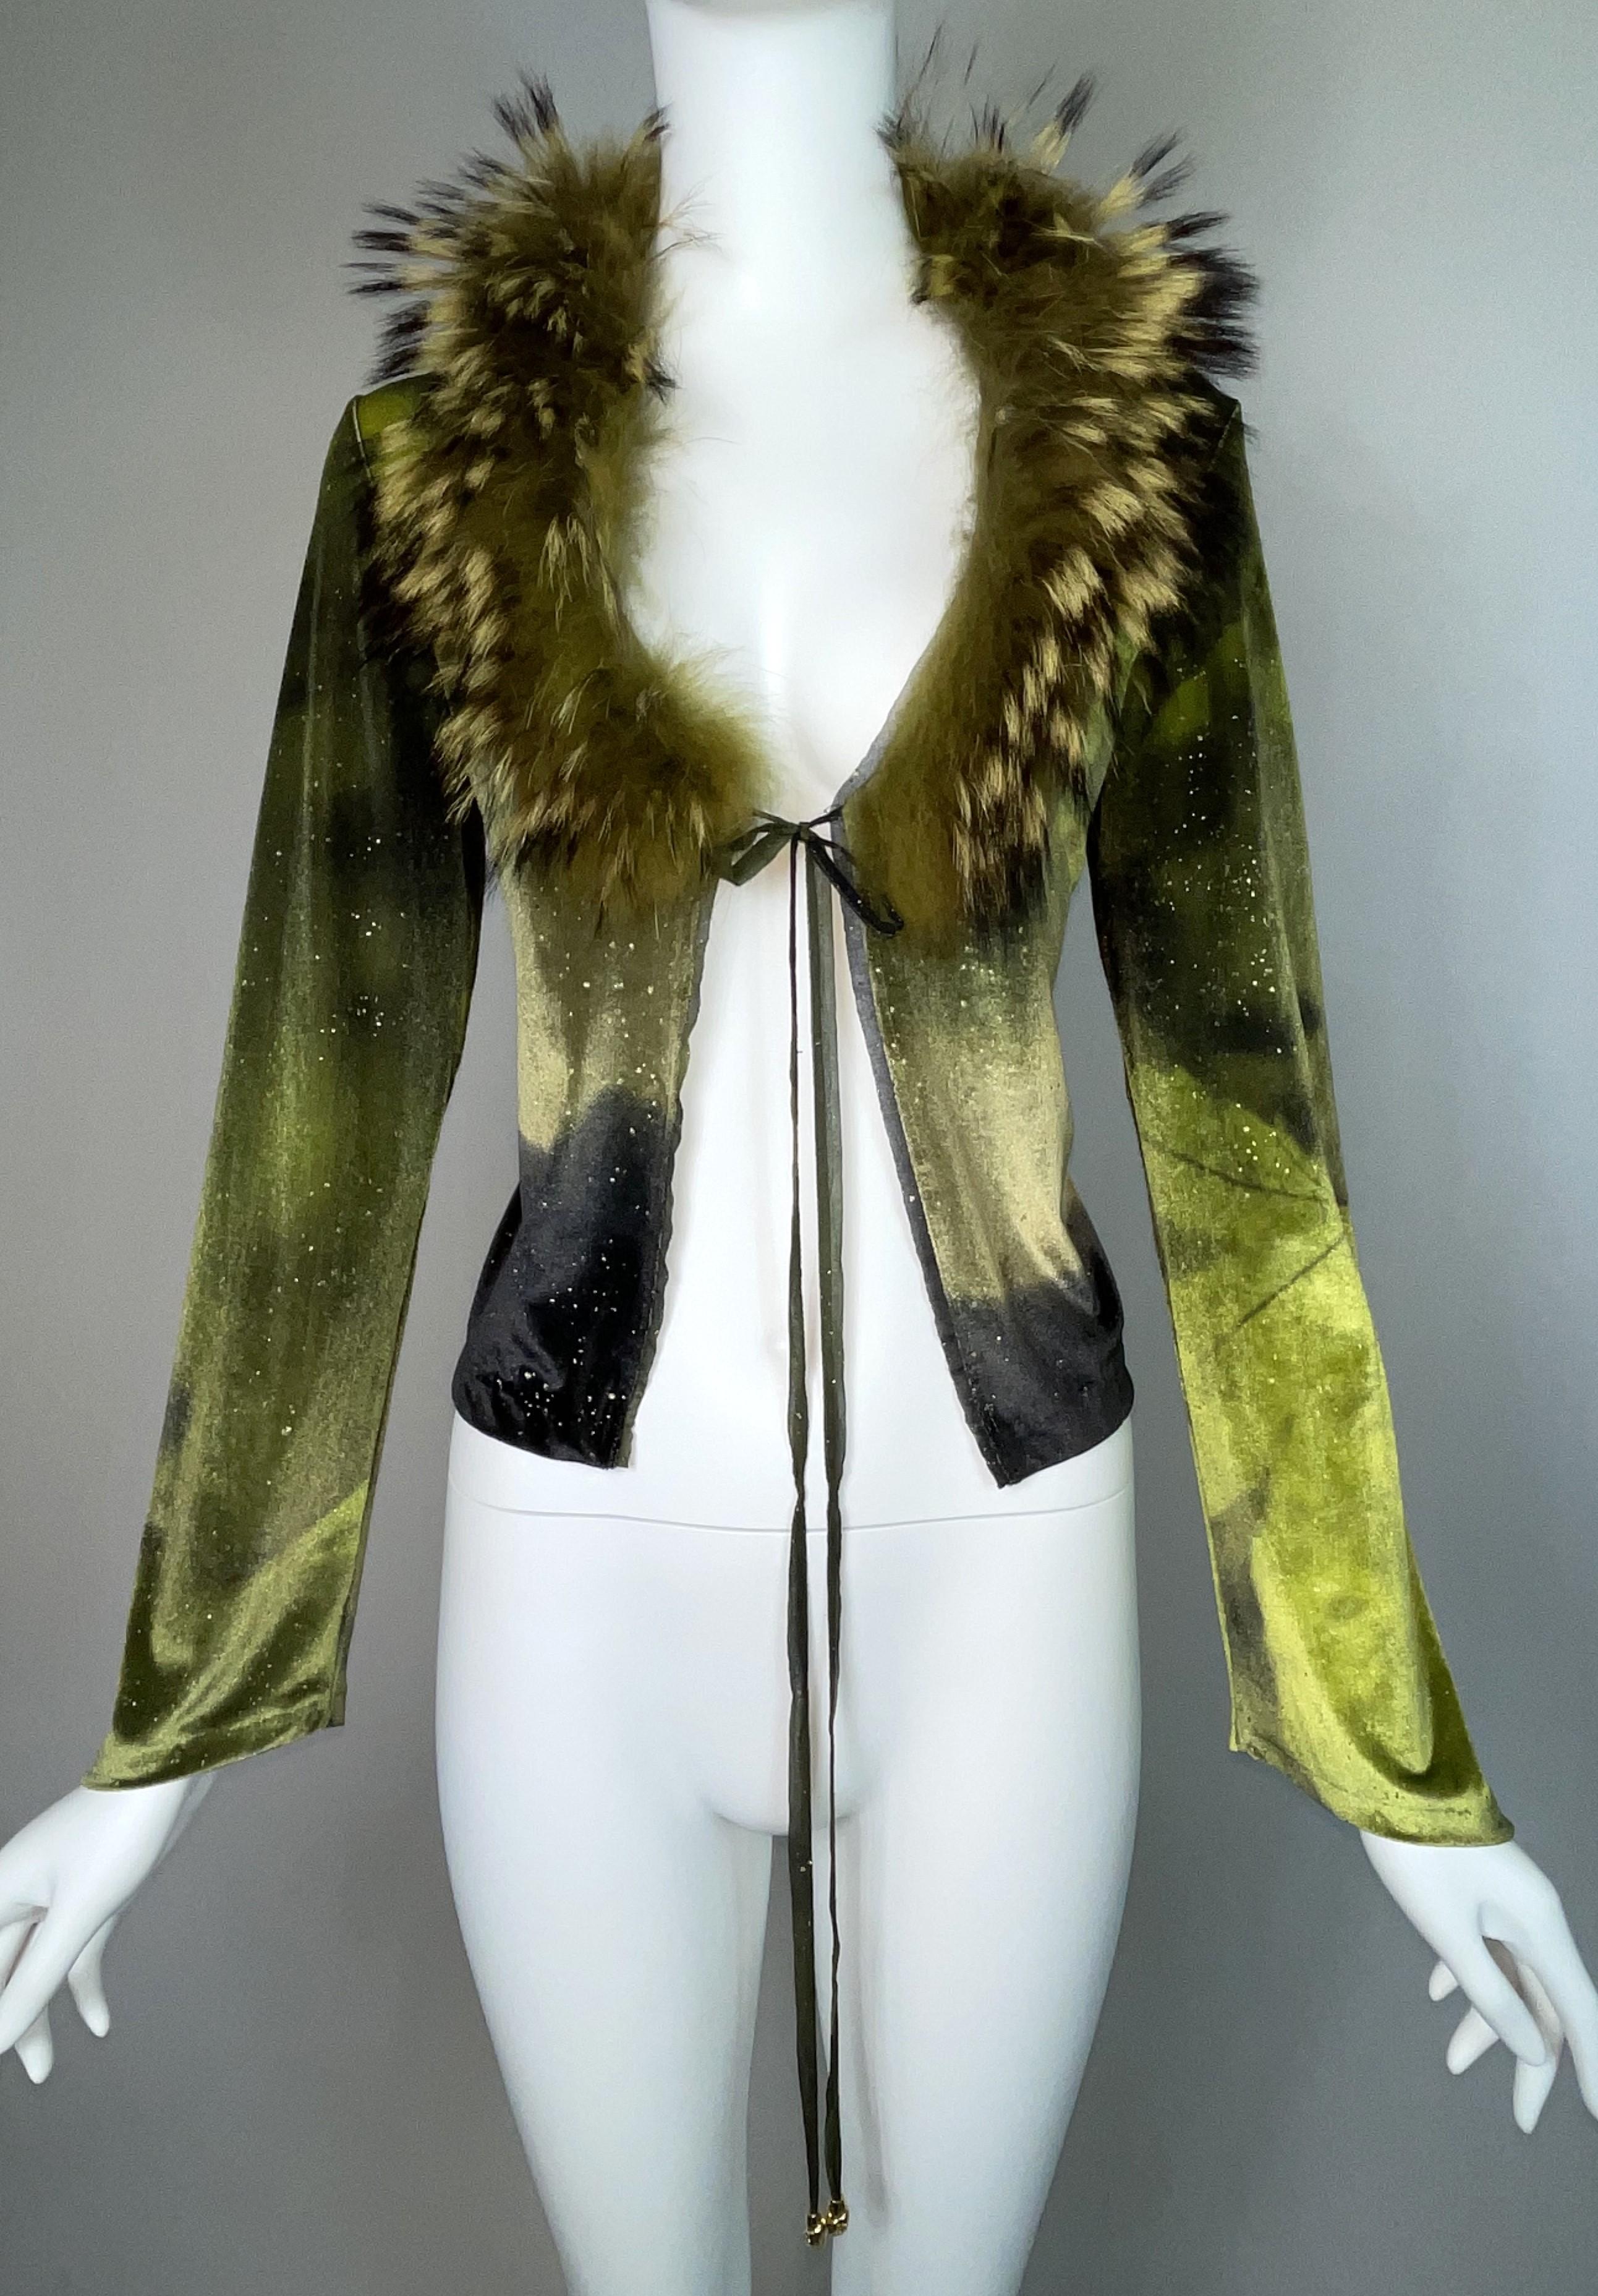 **THANK YOU FOR SHOPPING WITH MES DEUX FILLES**

DESIGNER: F/W 1999 Roberto Cavalli 
CONDITION: Excellent
FABRIC: Nylon blend w removeable fur collar
COUNTRY MADE: Italy
SIZE: M
MEASUREMENTS; provided as a courtesy, not a guarantee of fit:
Chest: